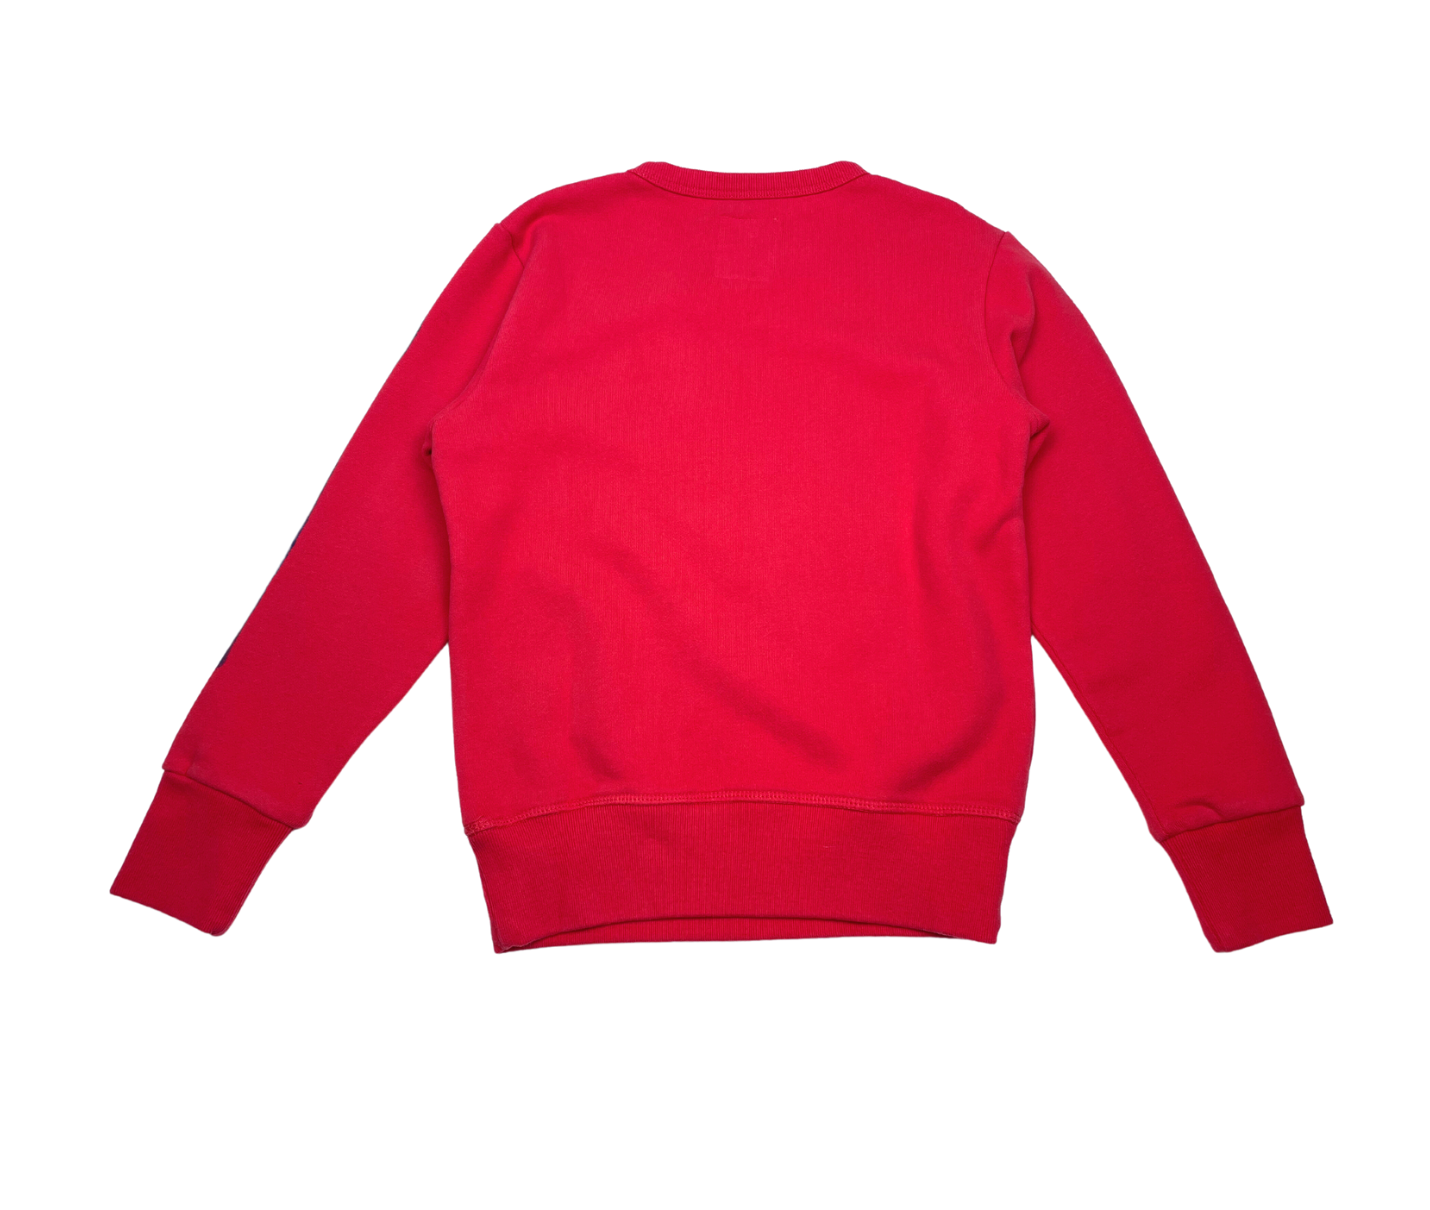 AO76 - Sweat rouge - 8 ans